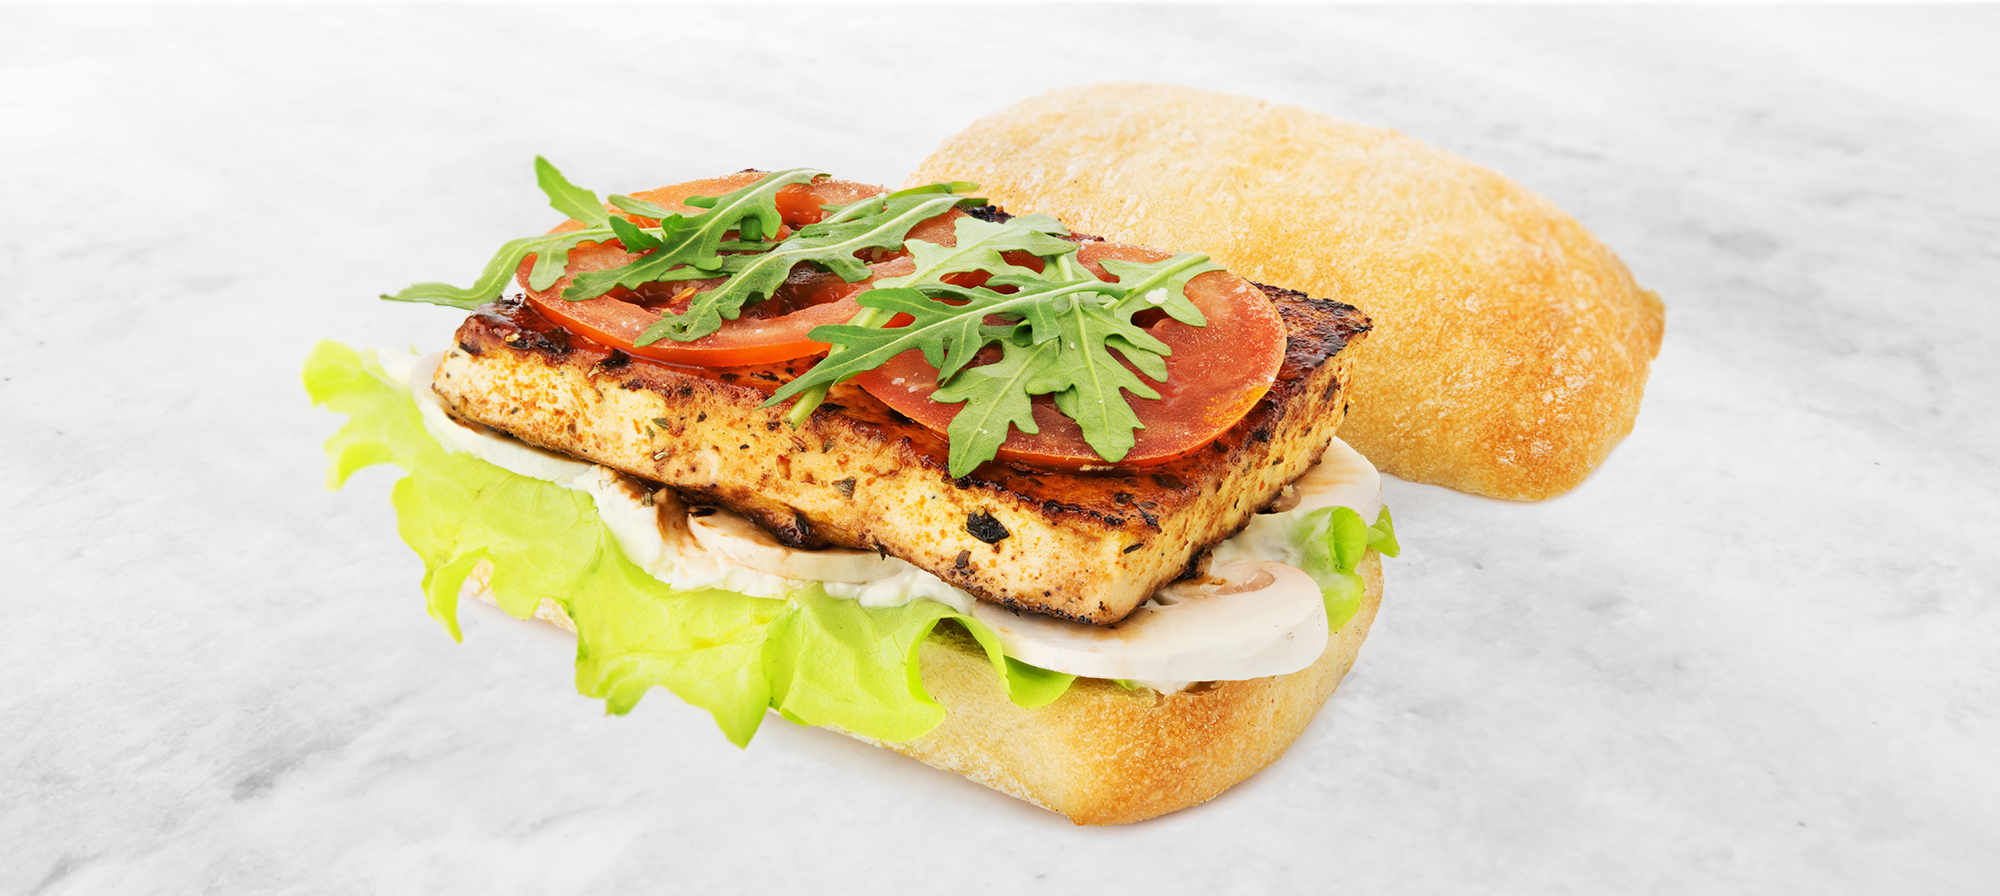 Zesty Grilled Tofu Burgers That Even Tofu Skeptics Will Love